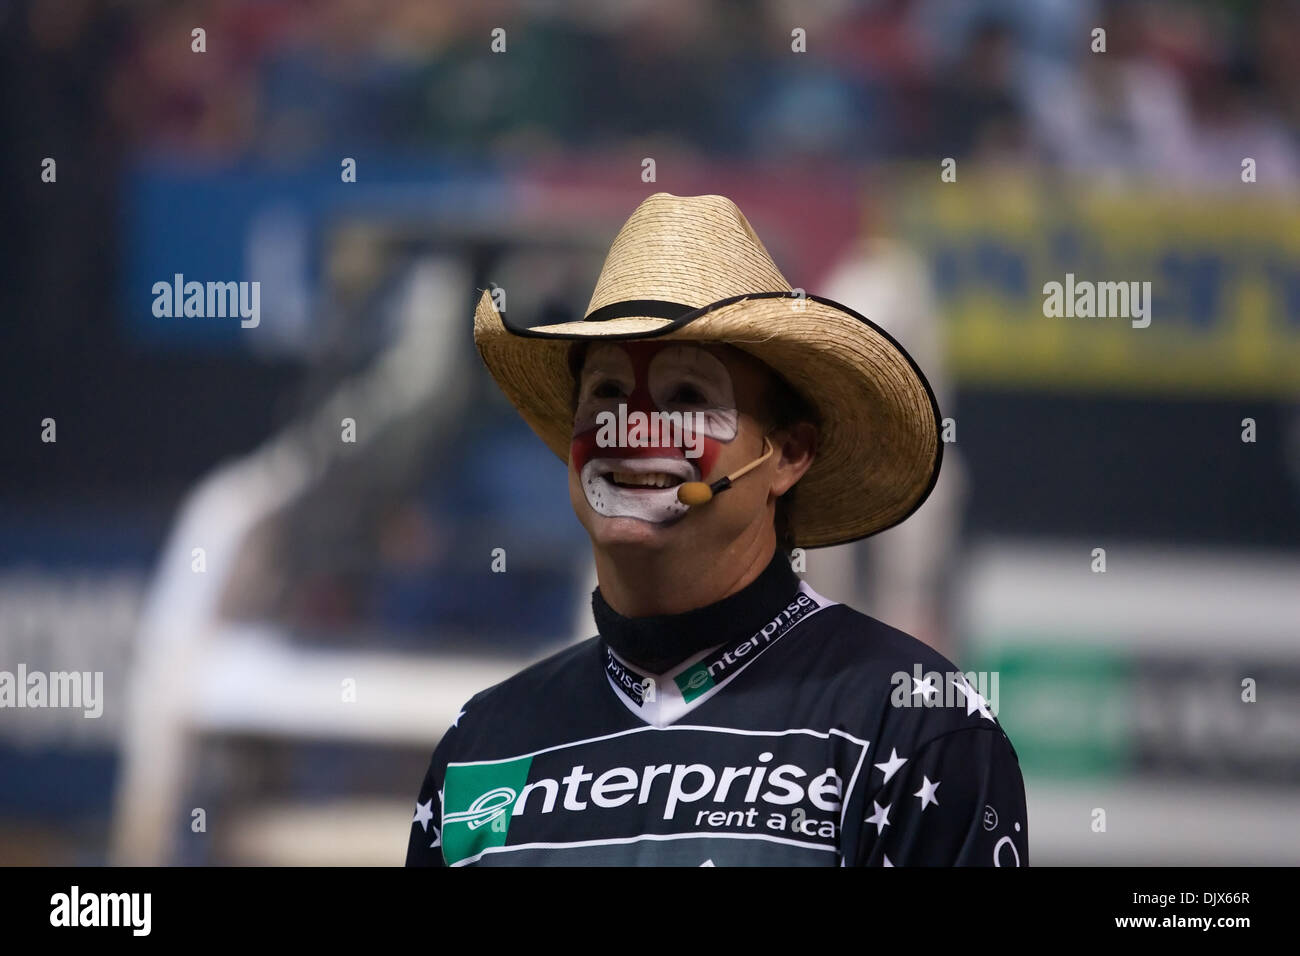 Oct. 24, 2010 - Las Vegas, Nevada, United States of America - Famous clown bull fighter, Flint Rasmussen, shows off his big smile for the crowd during the 5th round of competition at the 2010 Built Ford Tough PBR World Finals at the Thomas & Mack Center in Las Vegas, Nevada. (Credit Image: © Matt Gdowski/Southcreek Global/ZUMApress.com) Stock Photo